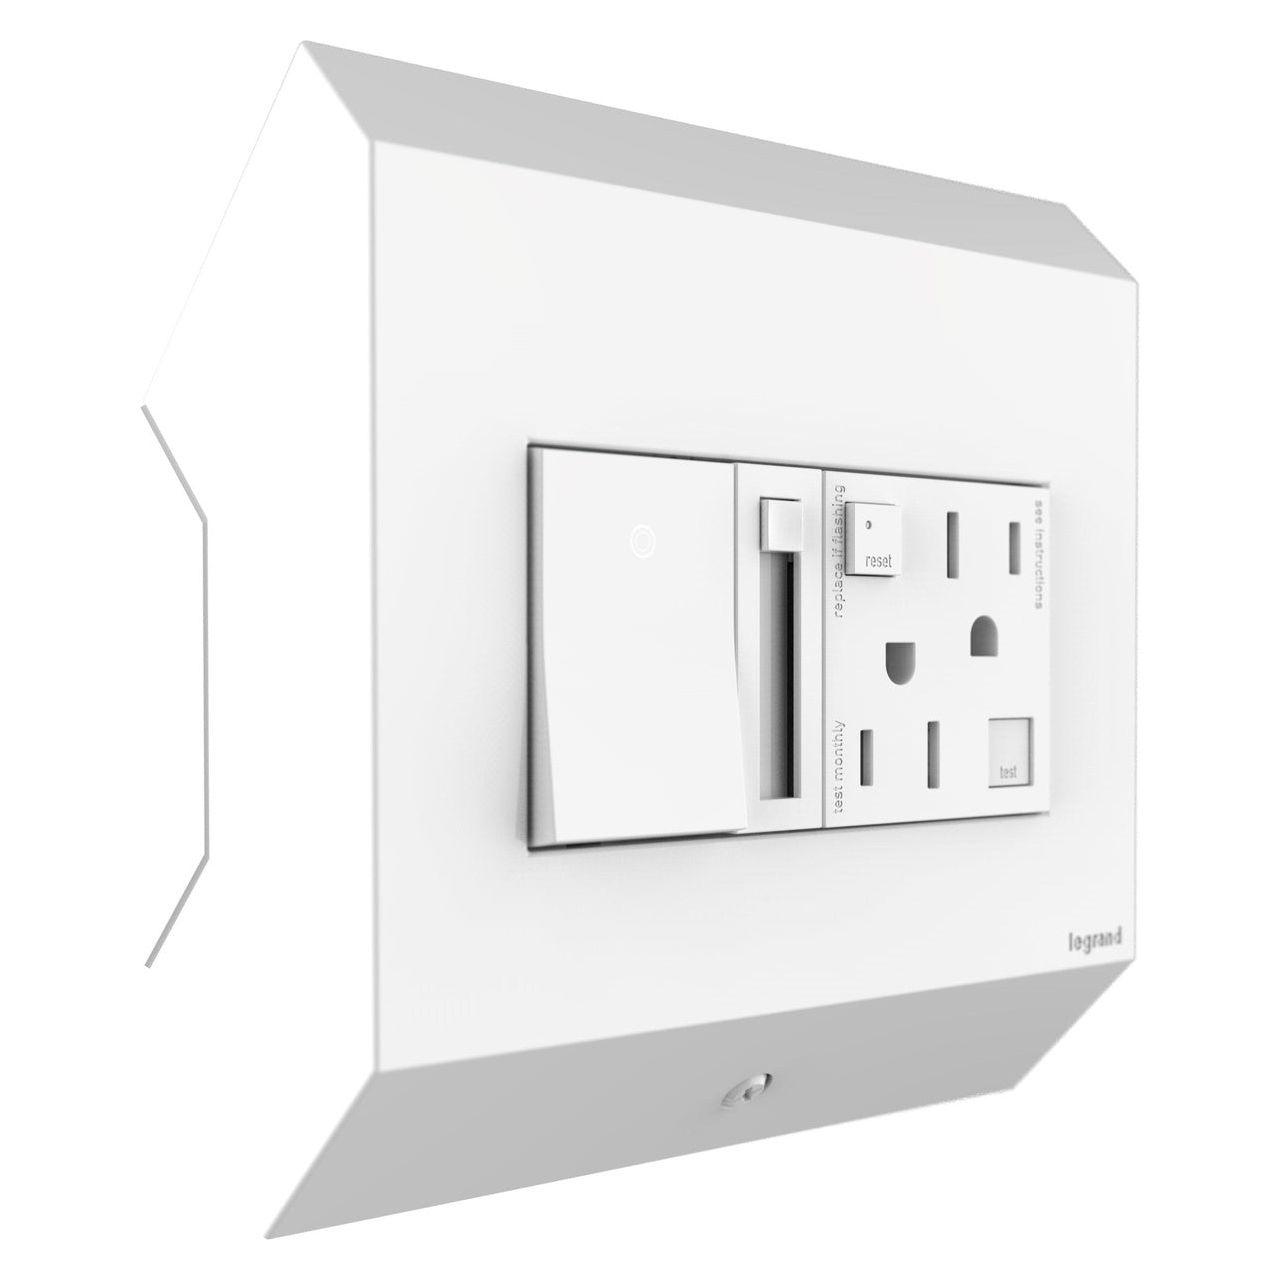 Legrand - Control Box with Paddle Dimmer and 15A GFCI Outlet - Lights Canada